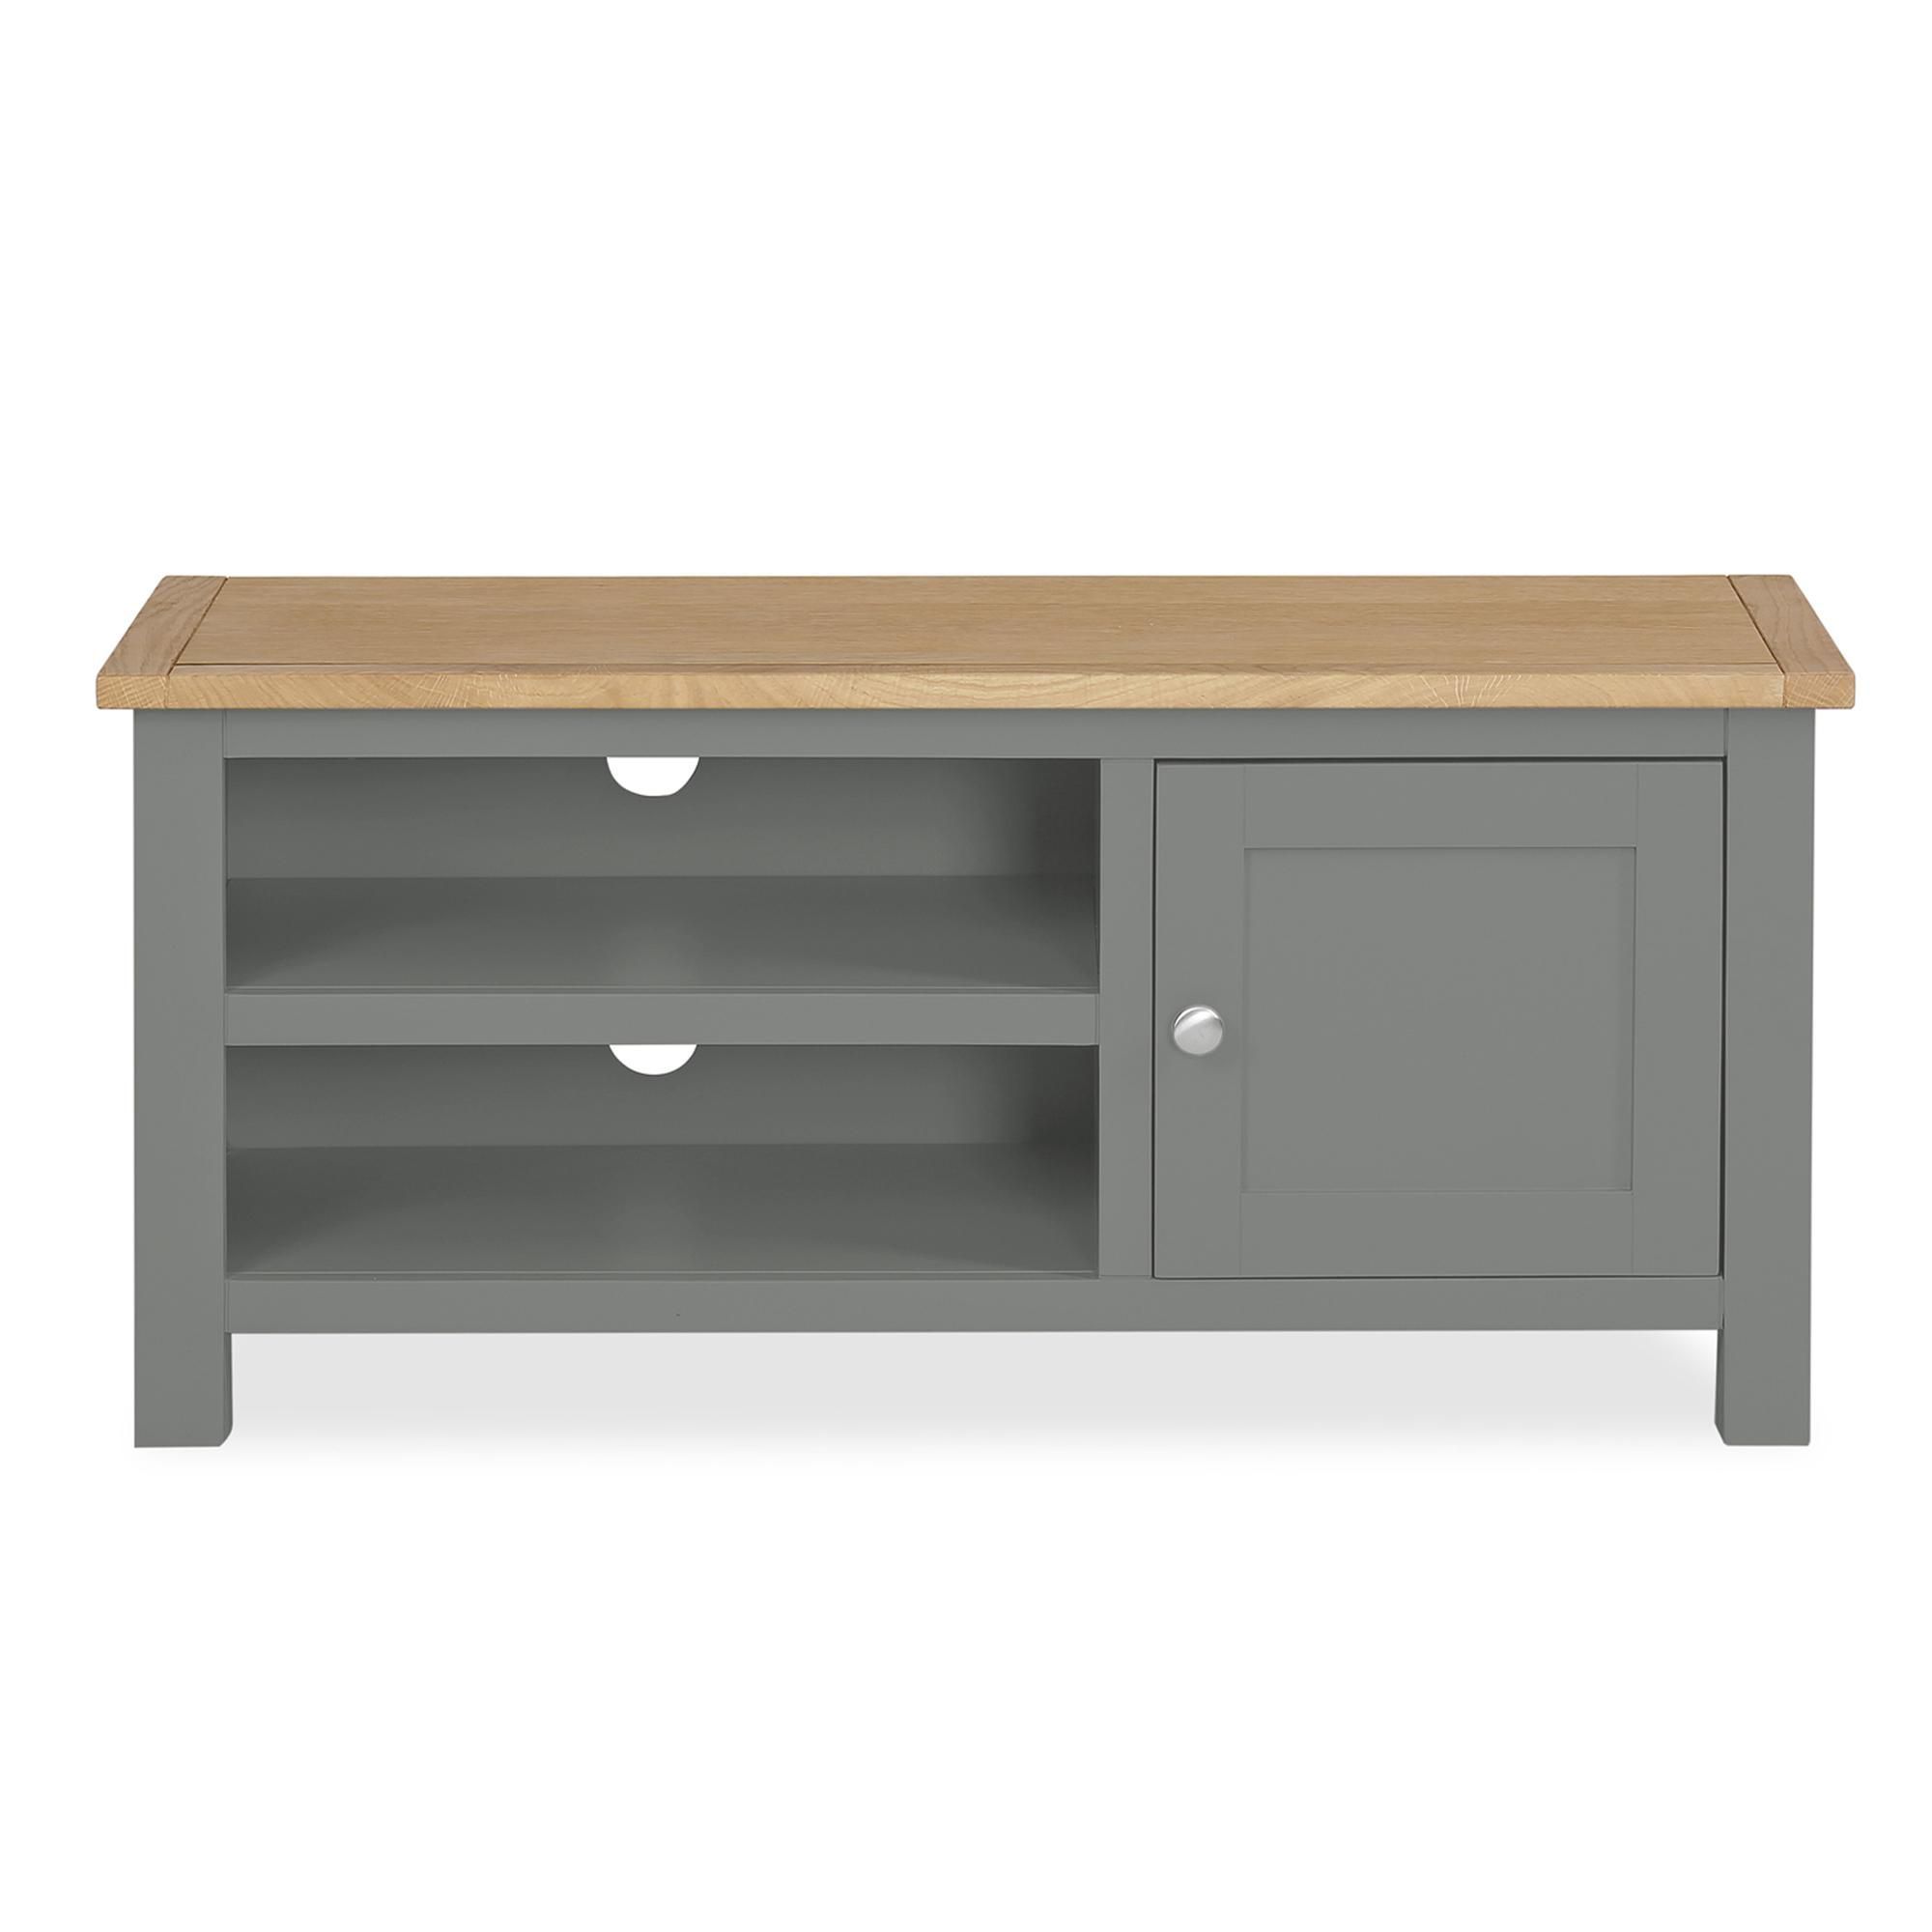 Ready Assembled Grey Living Room Furniture – Dlivingroomku With Regard To Bromley Slate Corner Tv Stands (View 2 of 15)